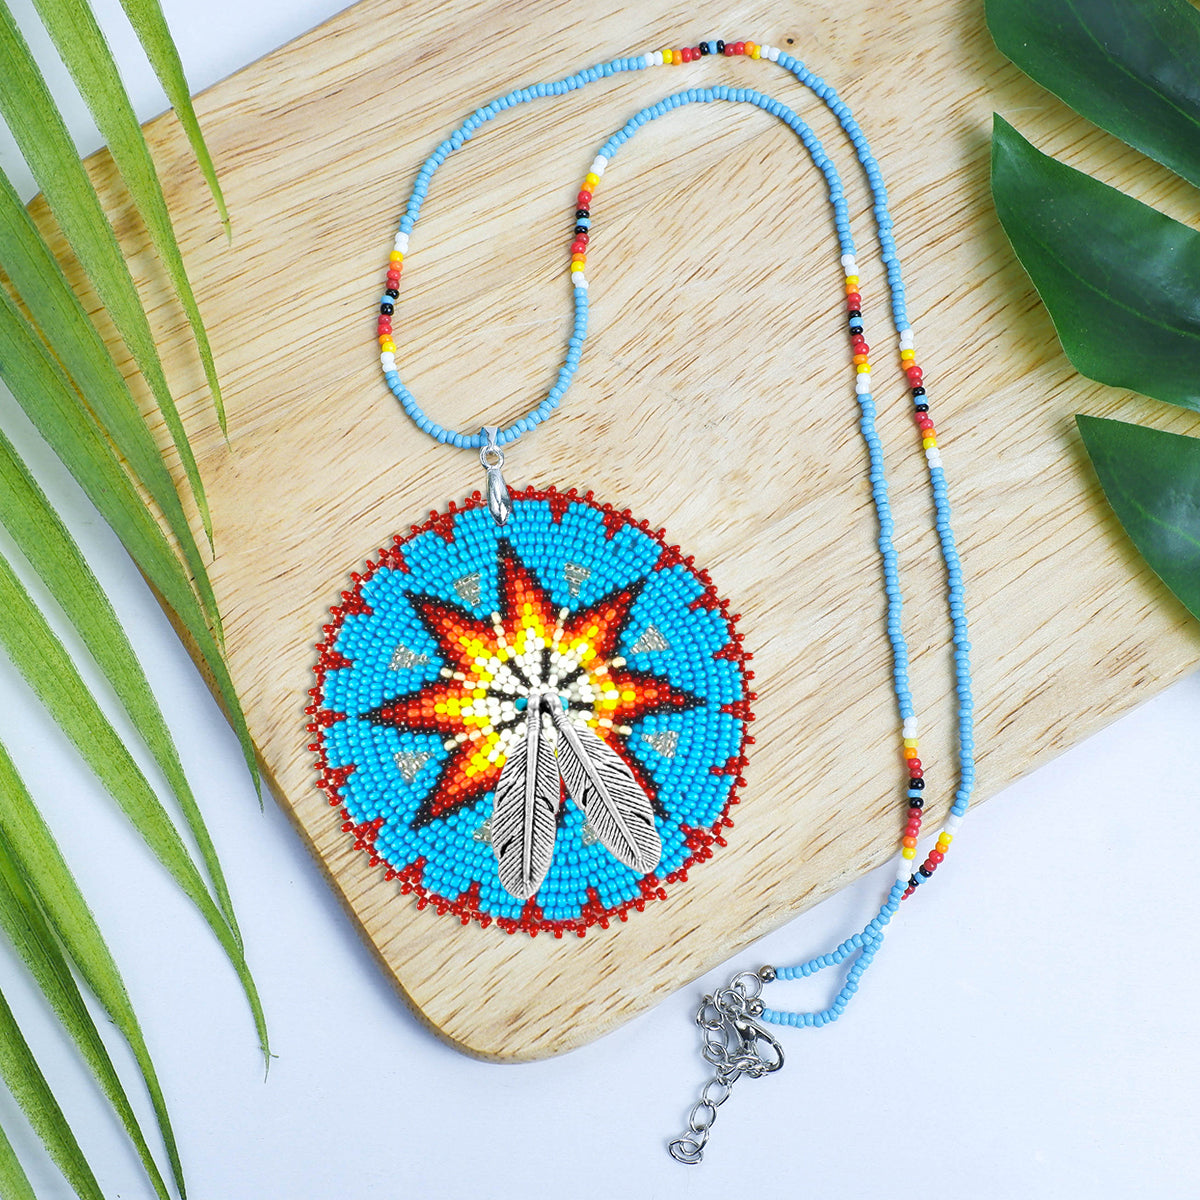 SALE 50% OFF - Blue Star Fire Pattern Beaded Patch Necklace Pendant Unisex With Native American Style